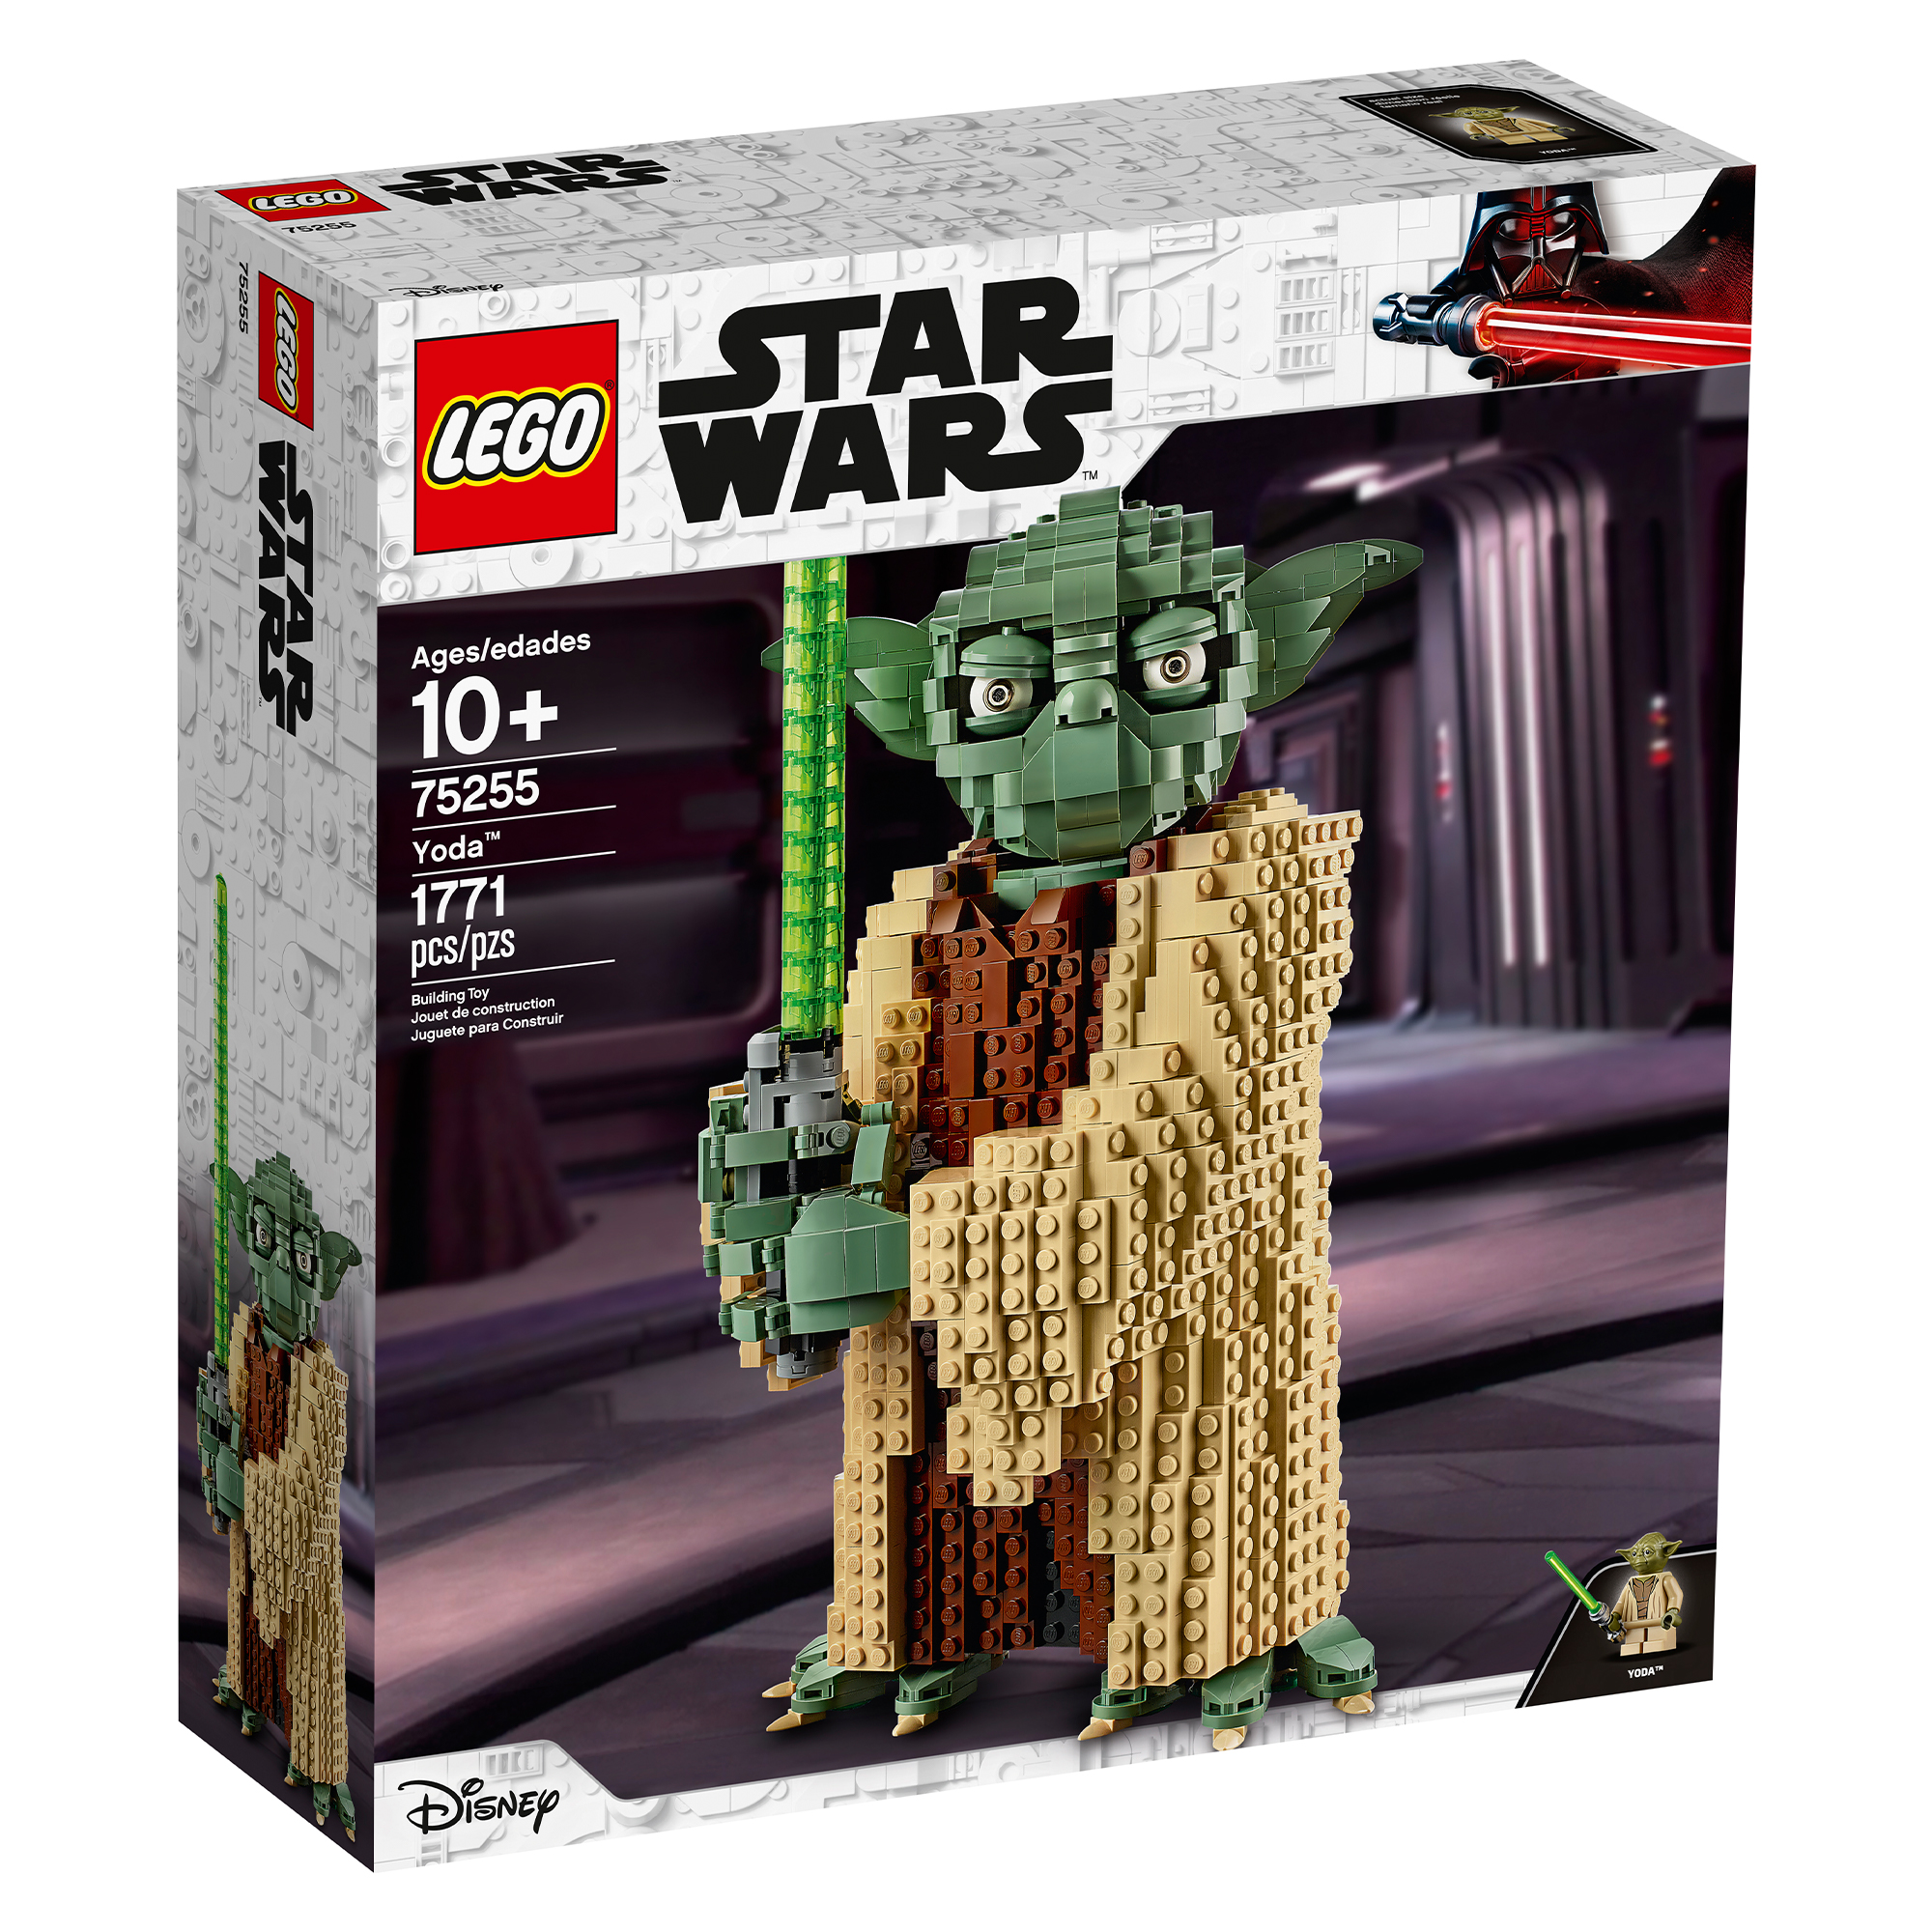 LEGO Star Wars: Attack of the Clones Yoda 75255 Building Toy Set (1,771 Pieces) - image 3 of 10